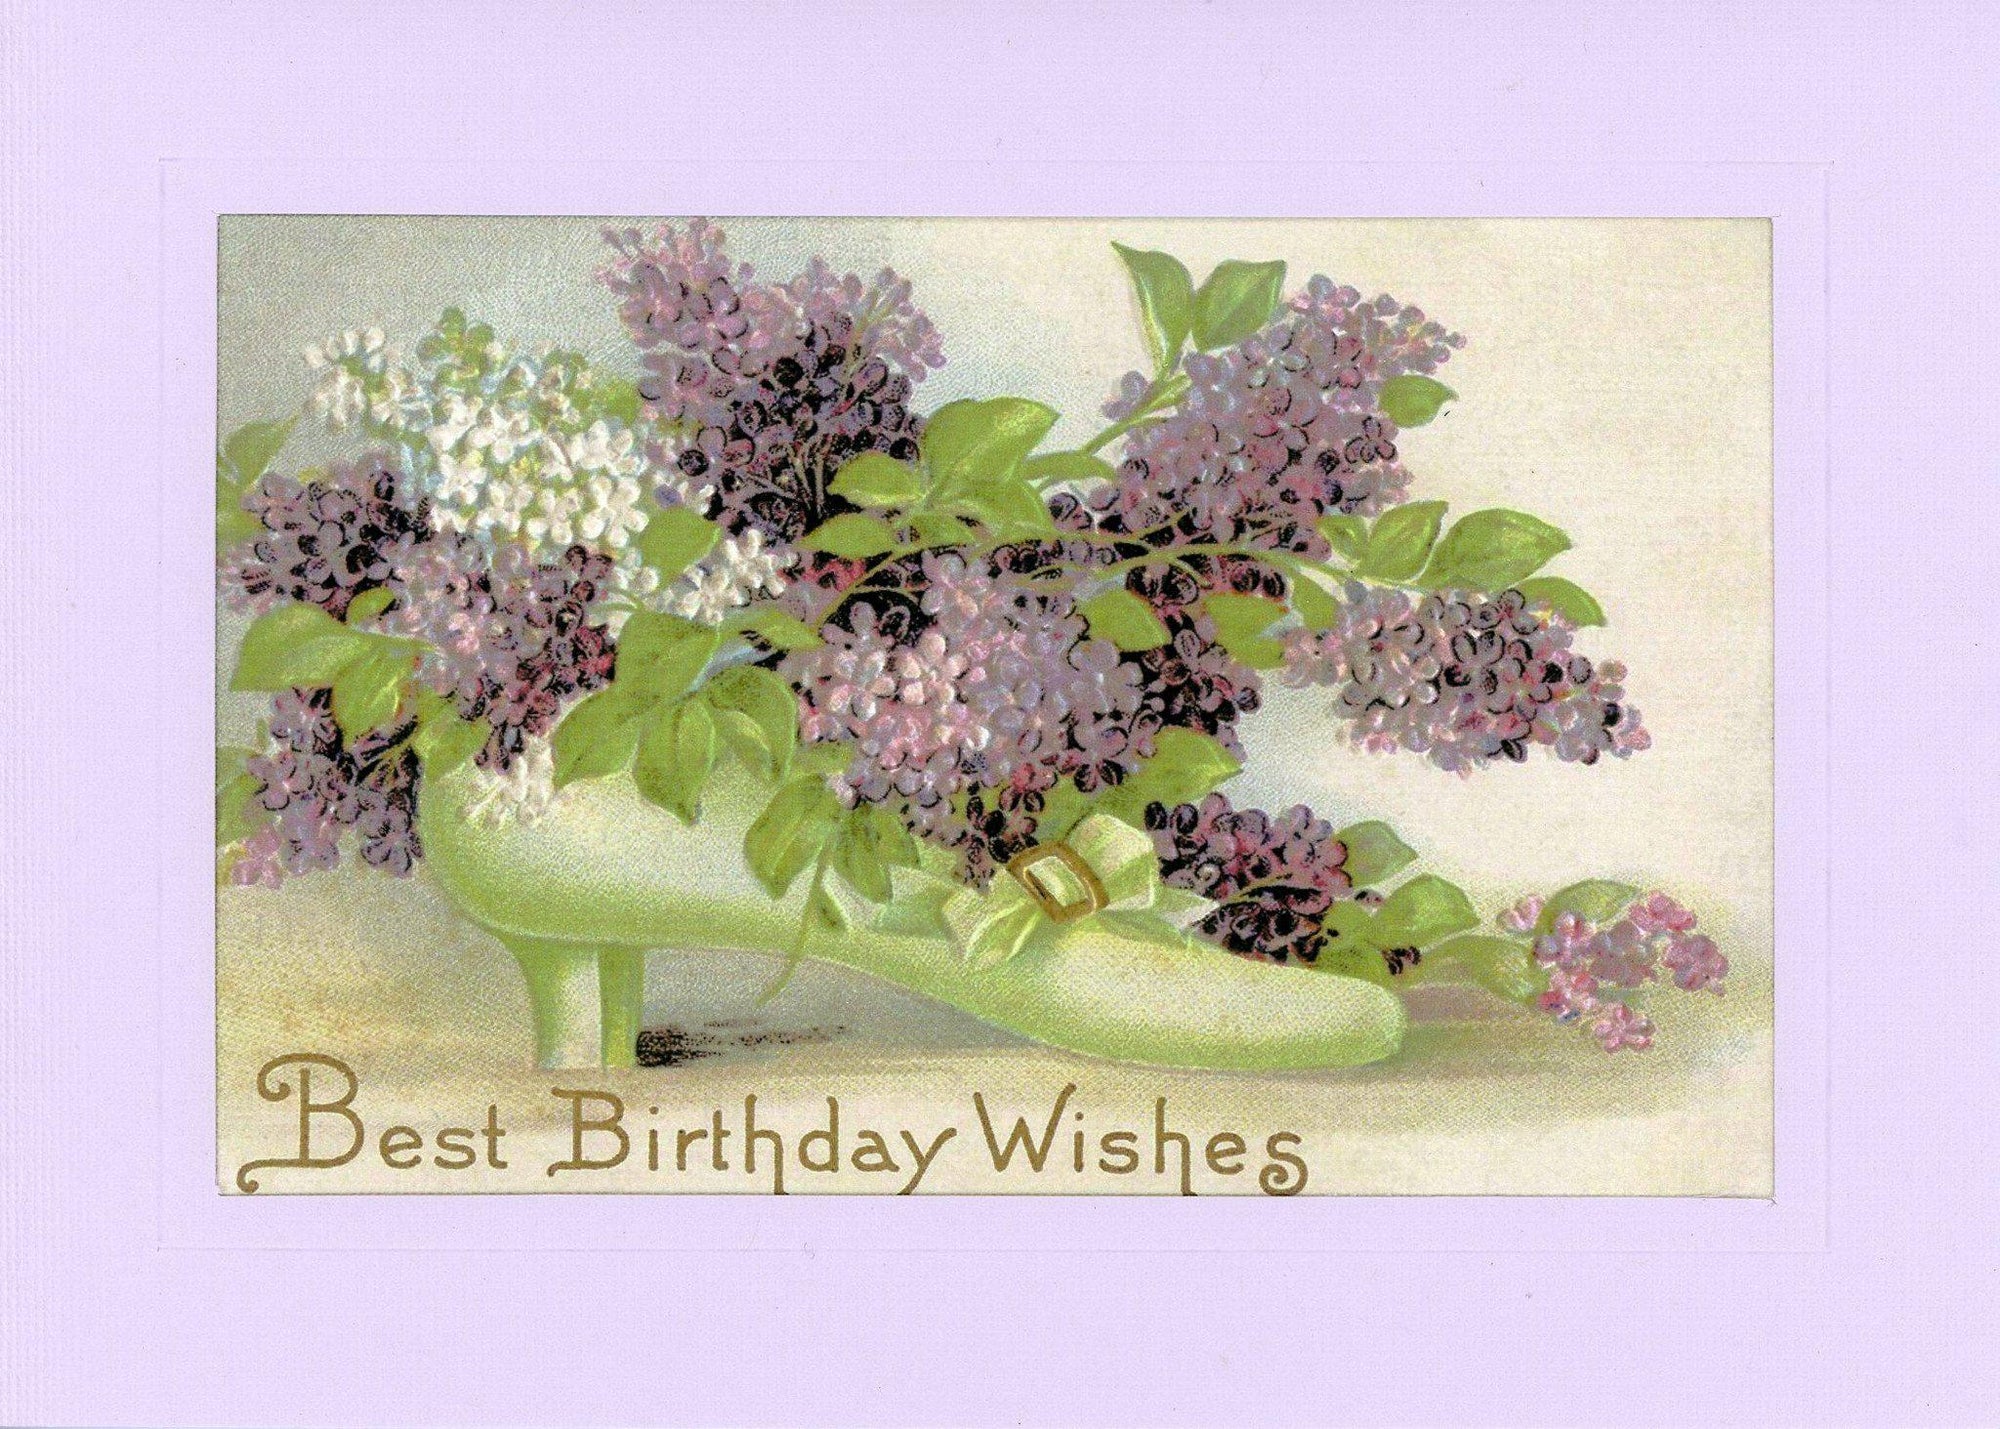 Best Birthday Wishes-Greetings from the Past-Plymouth Cards